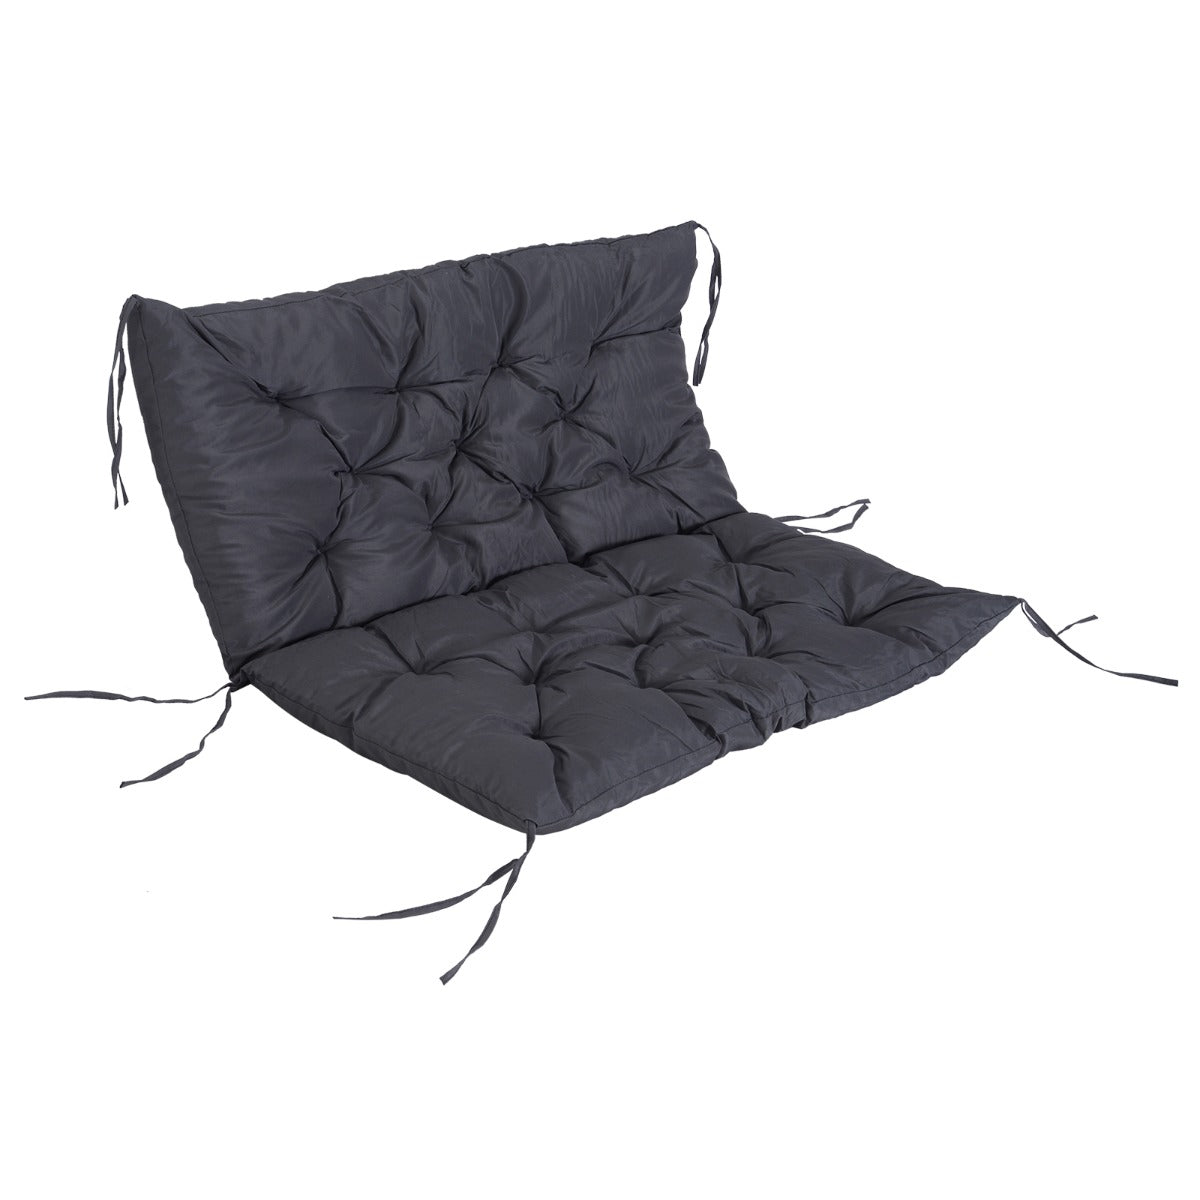 Outsunny Oxford Fabrics Tufted Swing Chair Cushion Replacement Grey